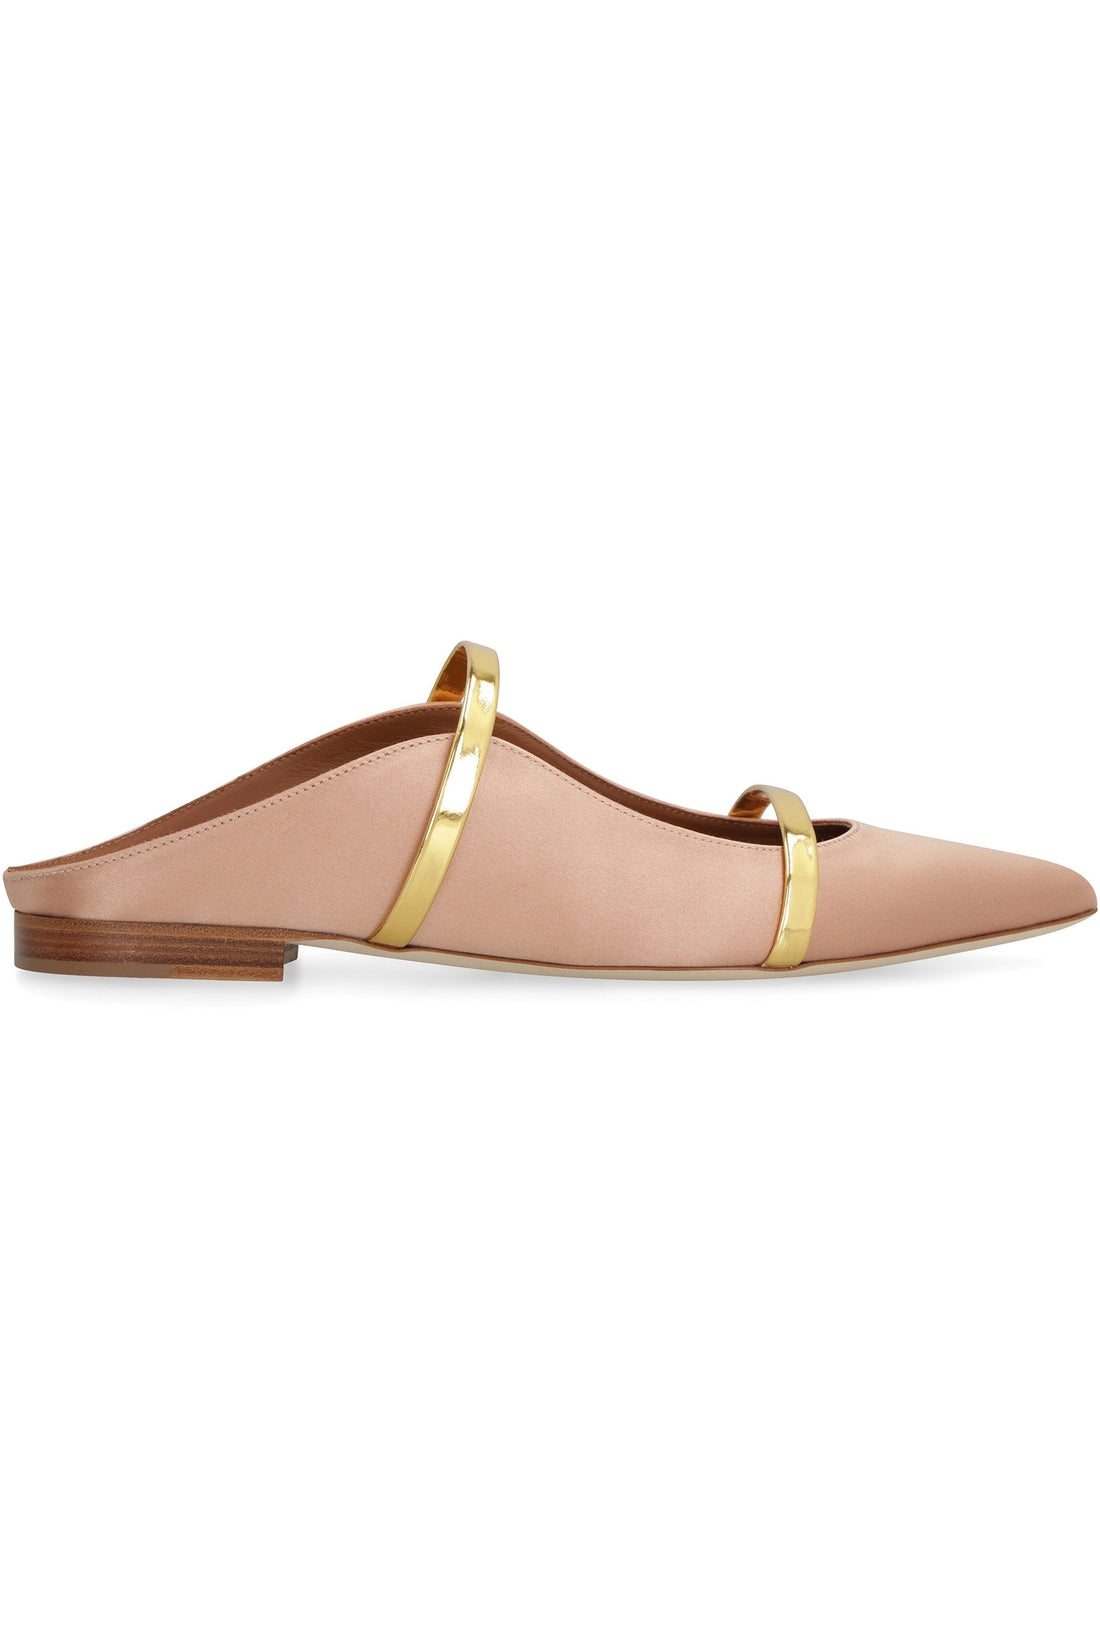 Malone Souliers-OUTLET-SALE-Maureen Flat pointy-toe ballet flats-ARCHIVIST